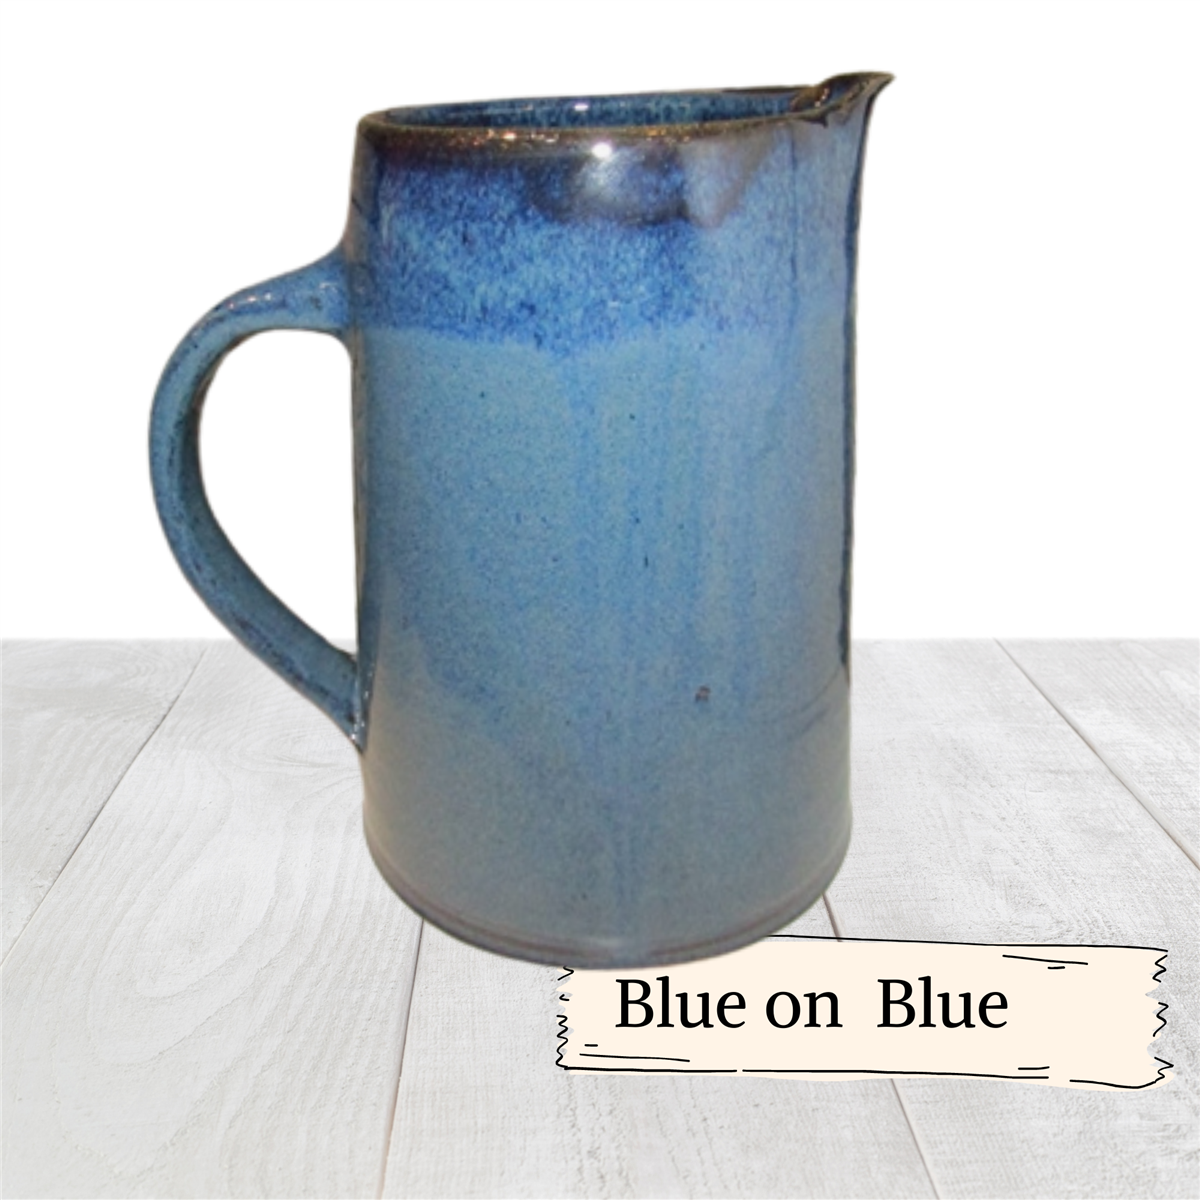 large pottery pitcher for lemonade ice tea or hot tea with handle. Ceramic  – Traditions Pottery